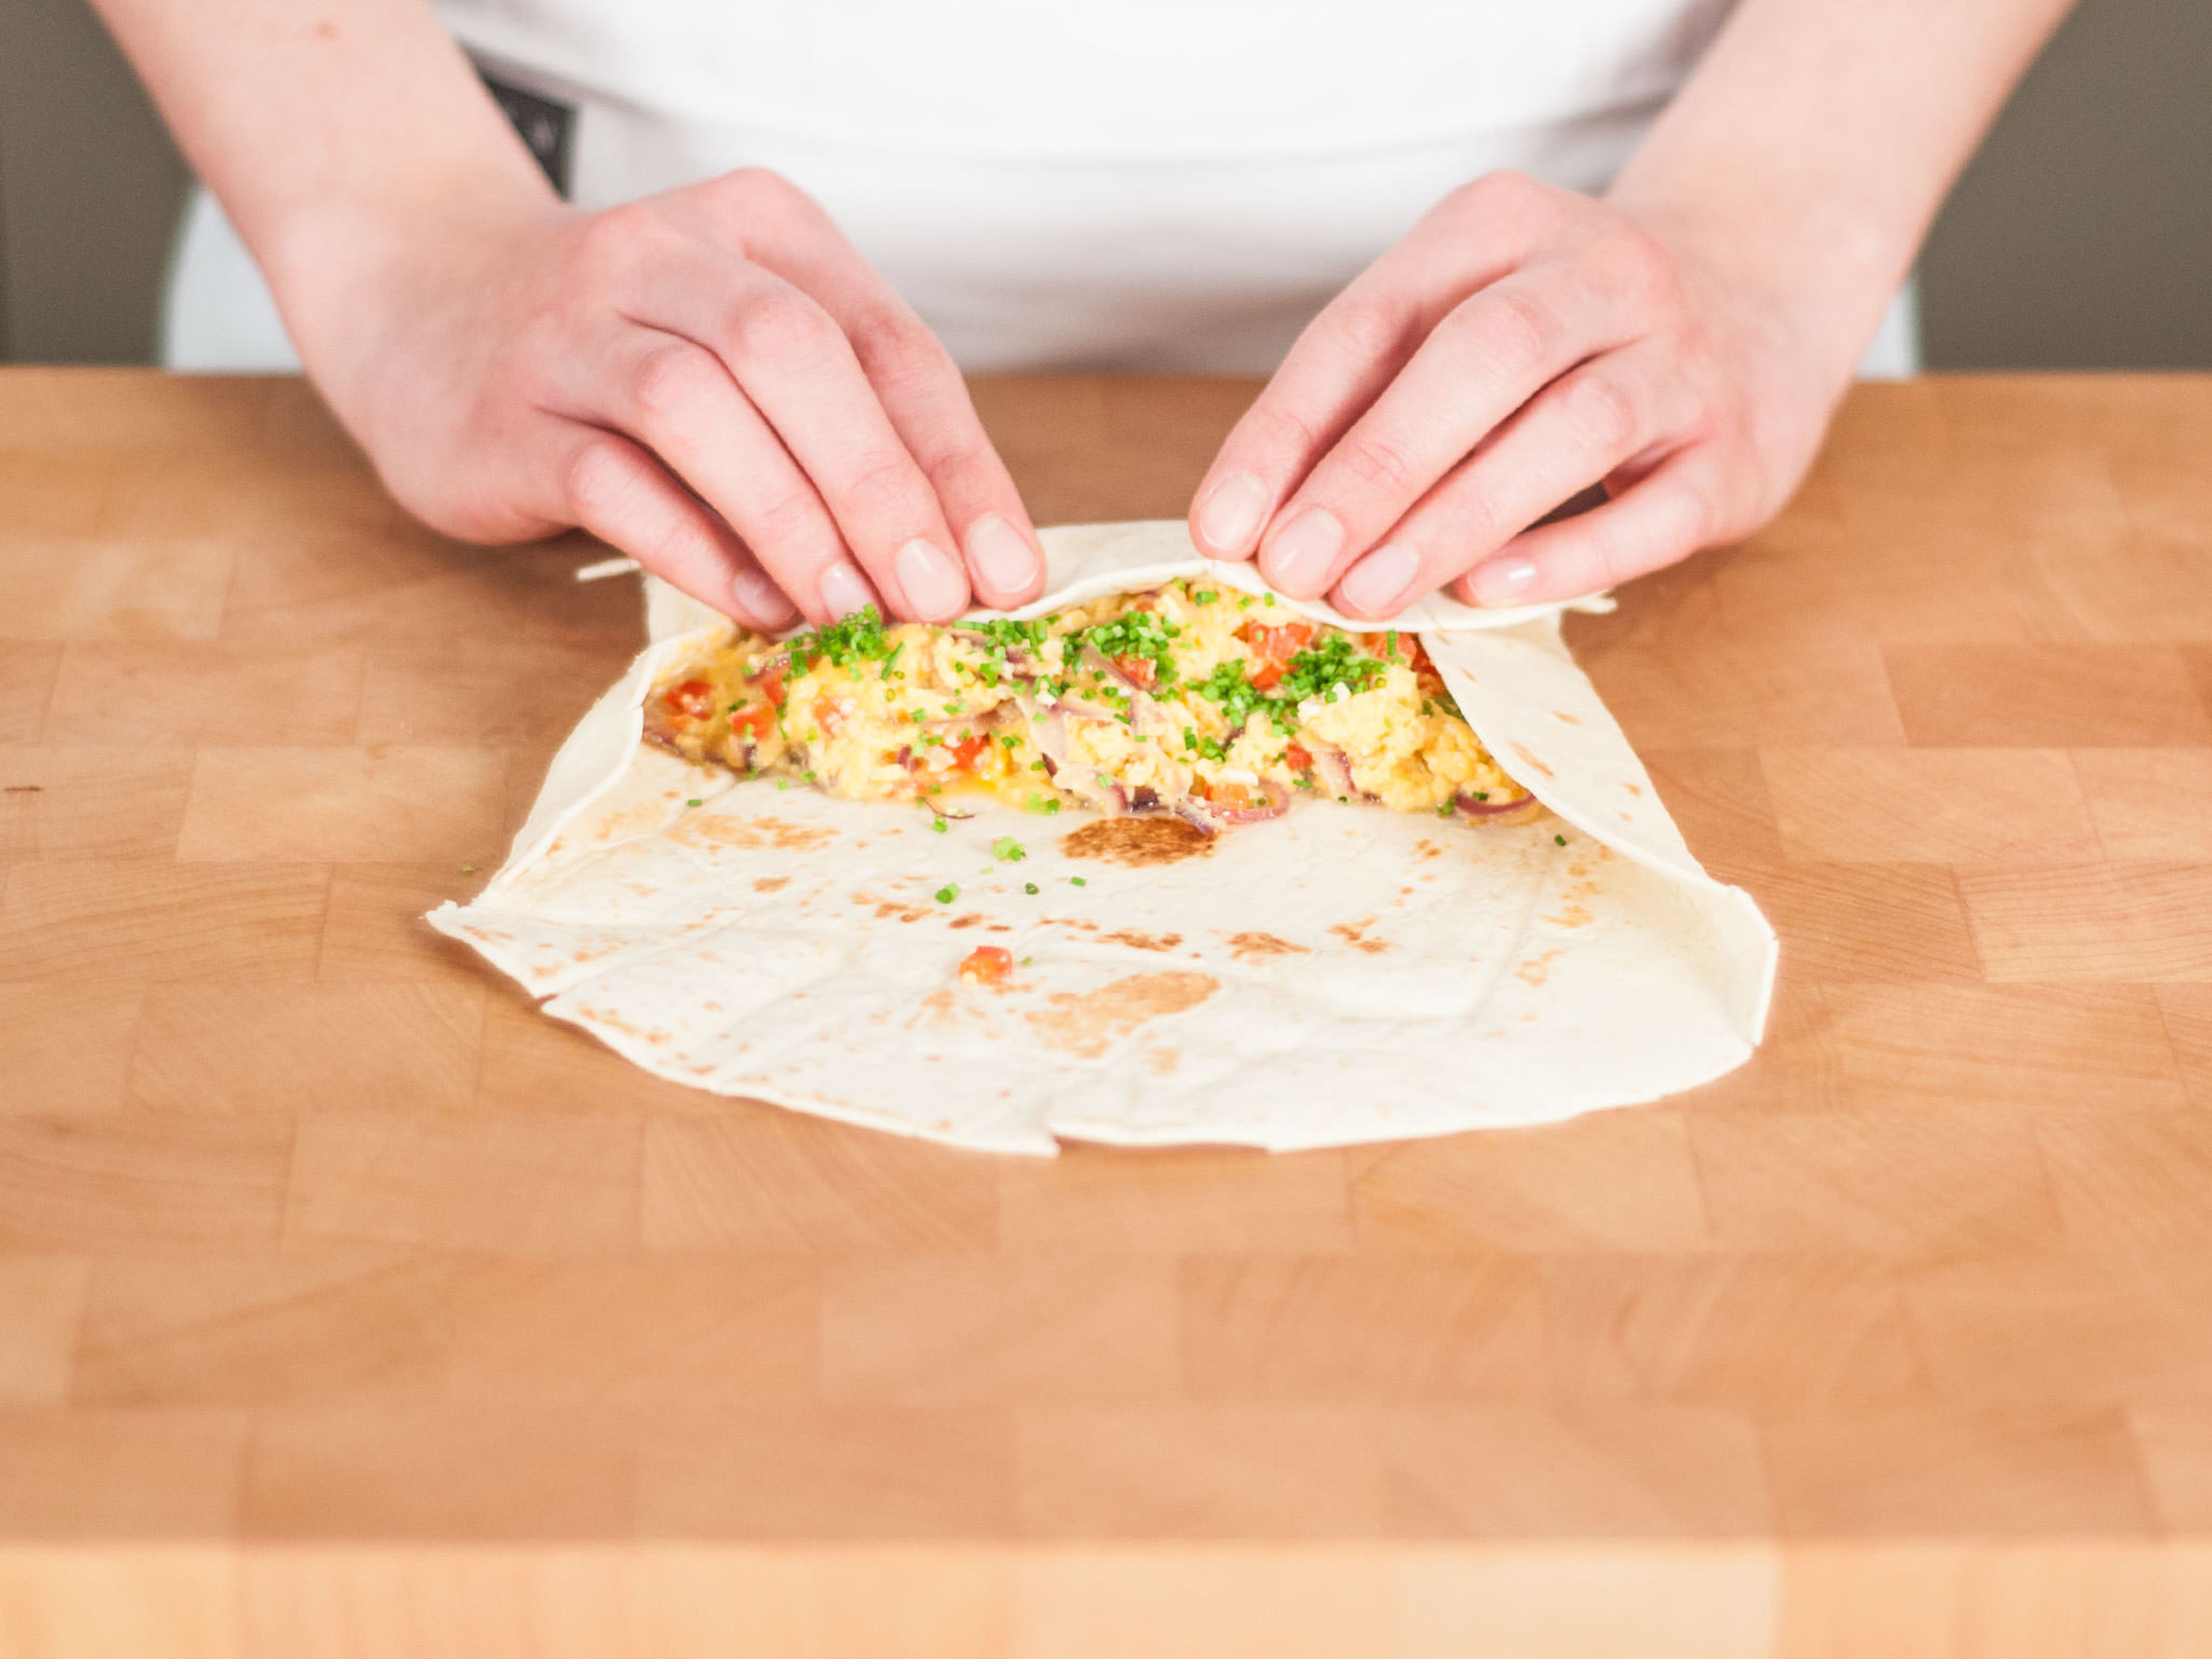 Place some of the eggs in the middle of the tortilla, taking care not to overfill. Sprinkle some chives on top. Fold tortilla in from the sides. Then, roll forward from bottom with thumbs until burrito is tightly rolled. Enjoy!